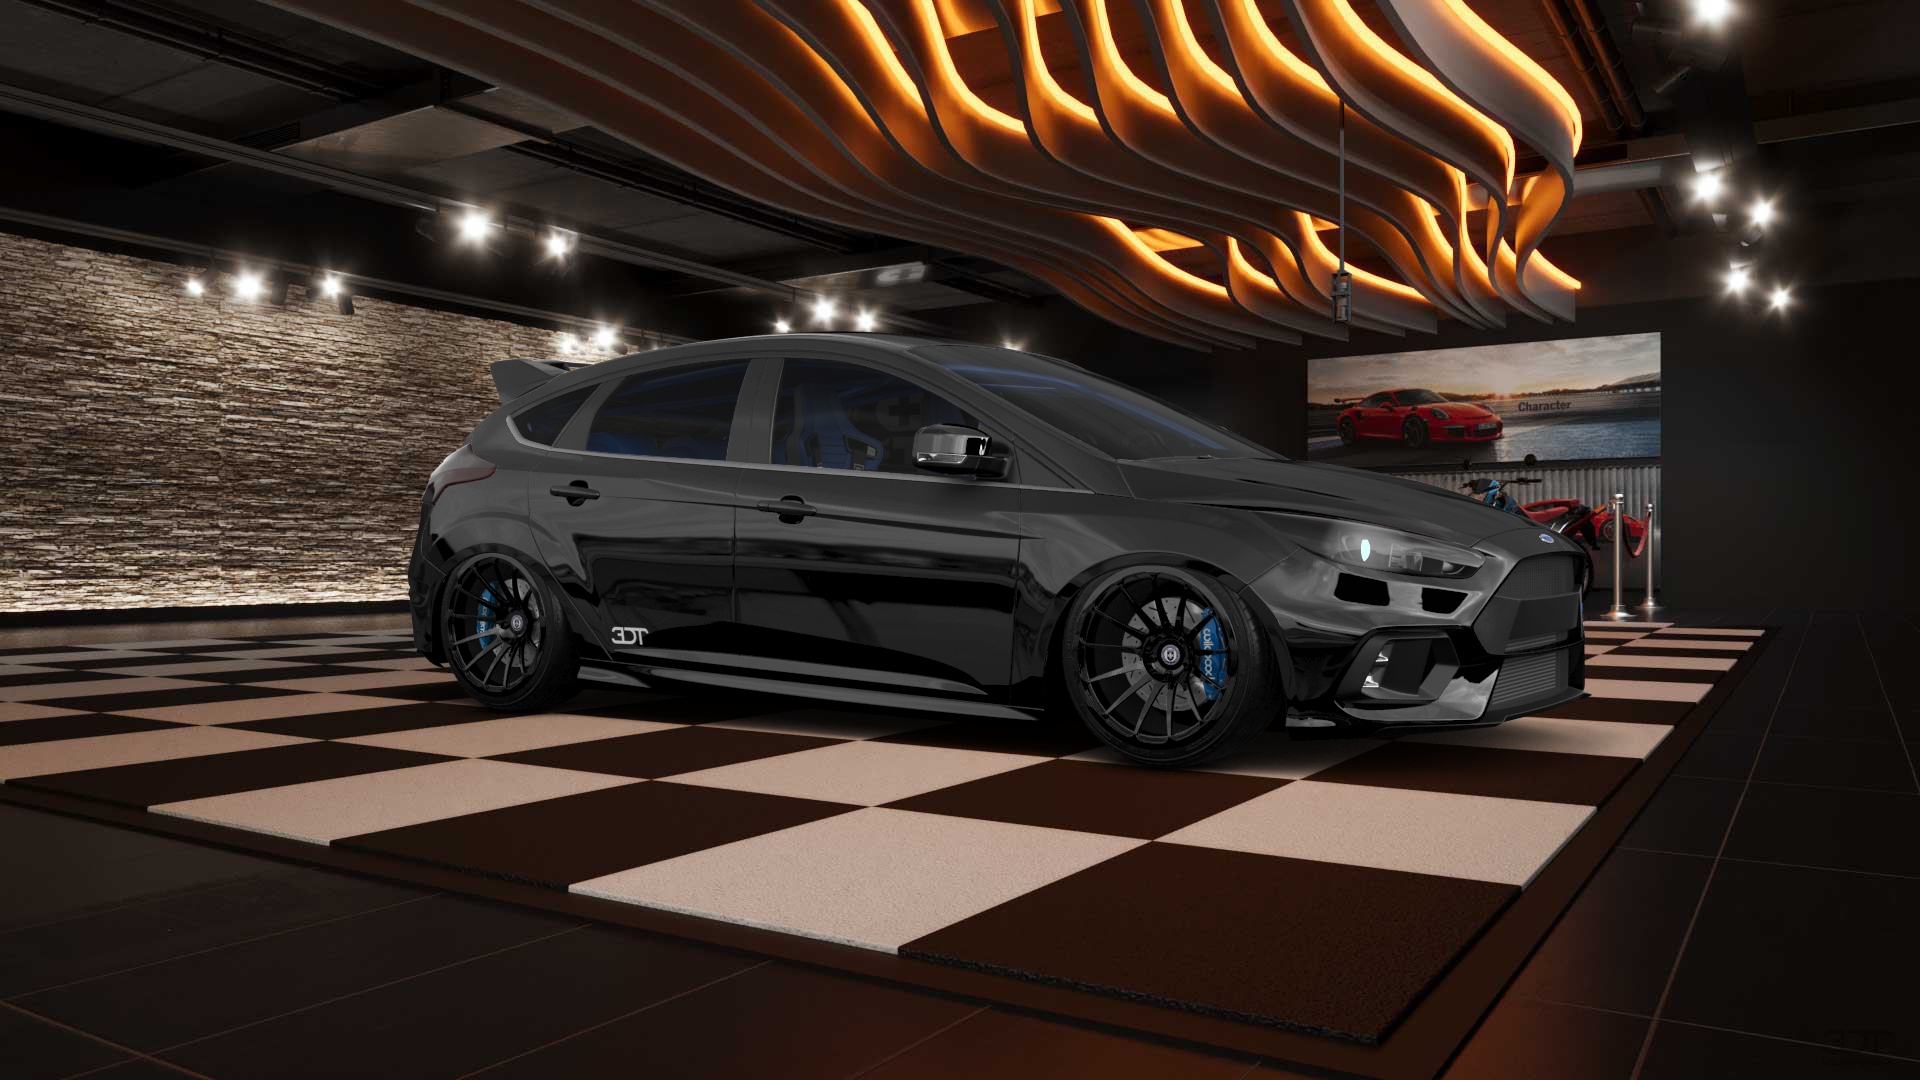 Ford Focus Hatchback 2015 tuning